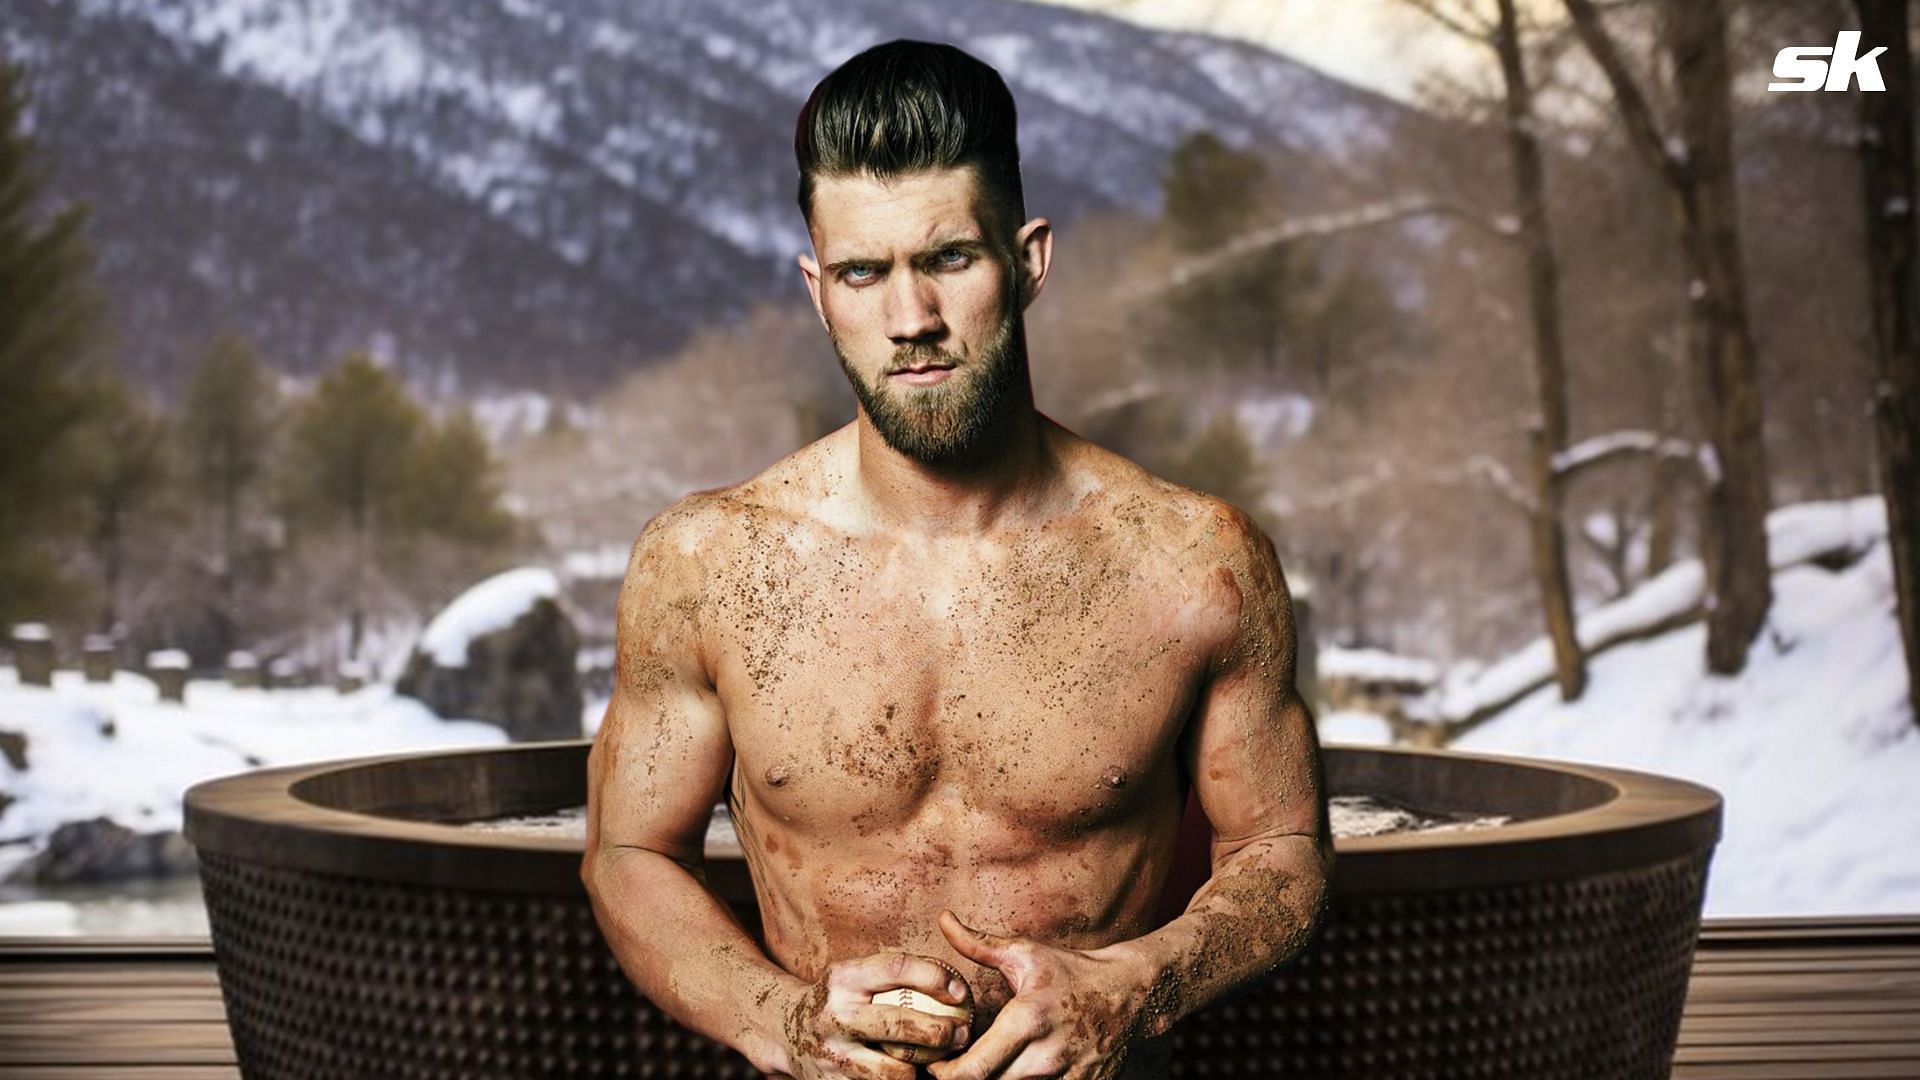 Bryce Harper takes an unorthodox approach to physical and mental wellbeing